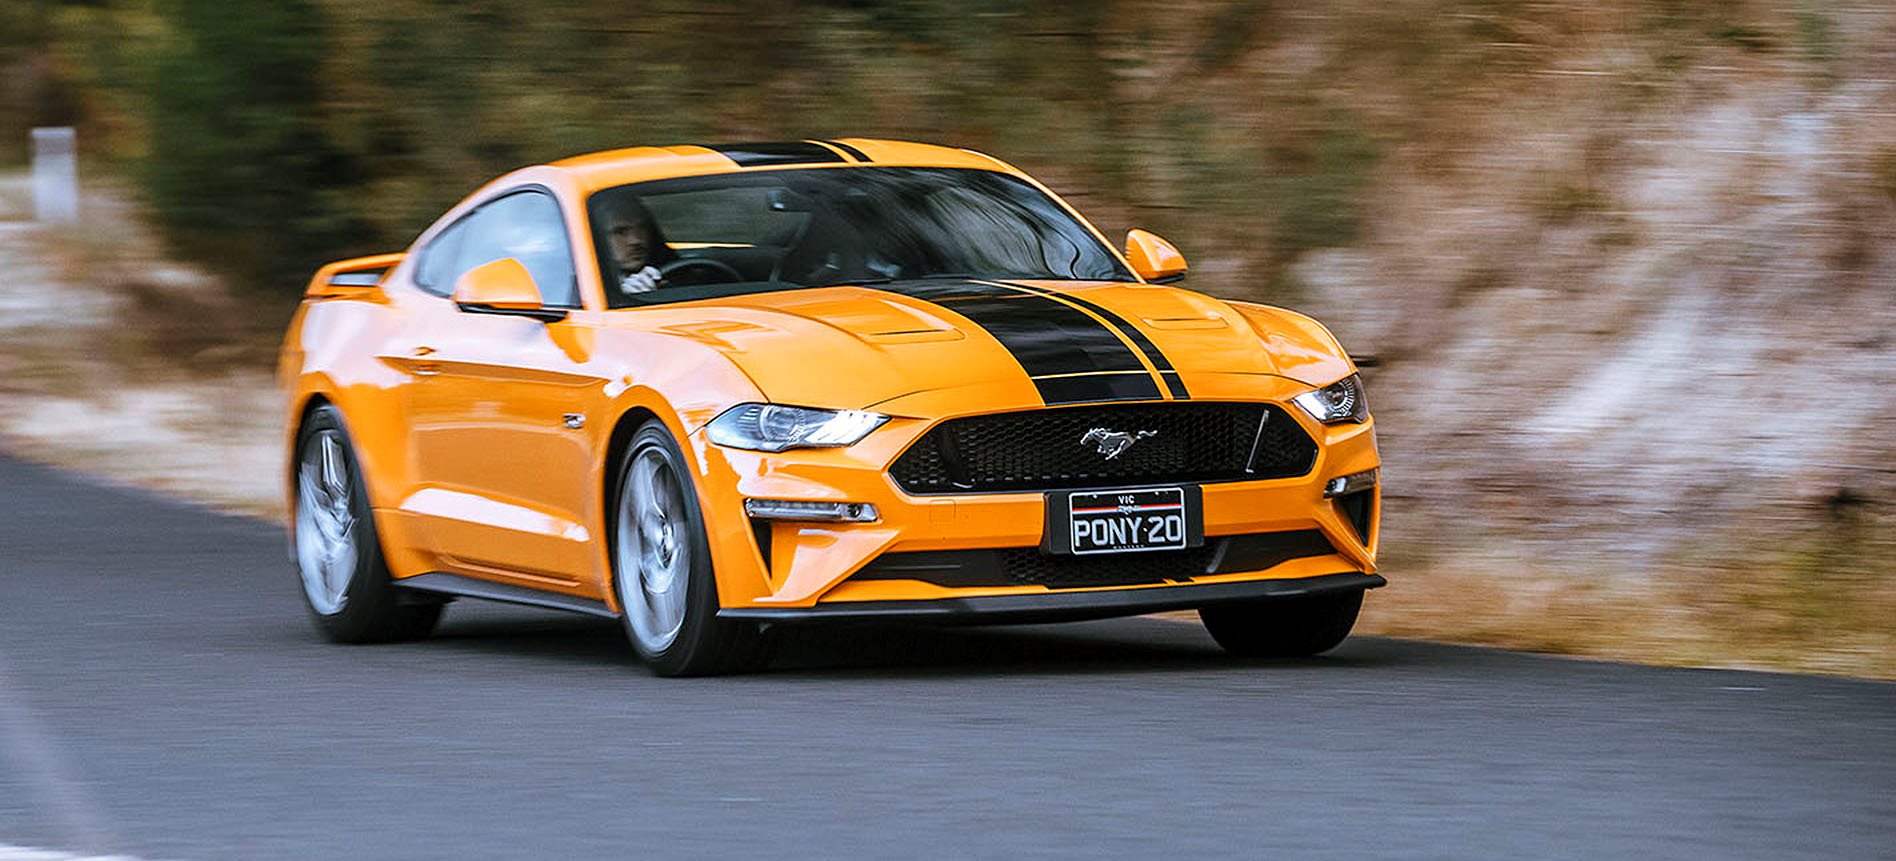 19 Ford Mustang Gt Review